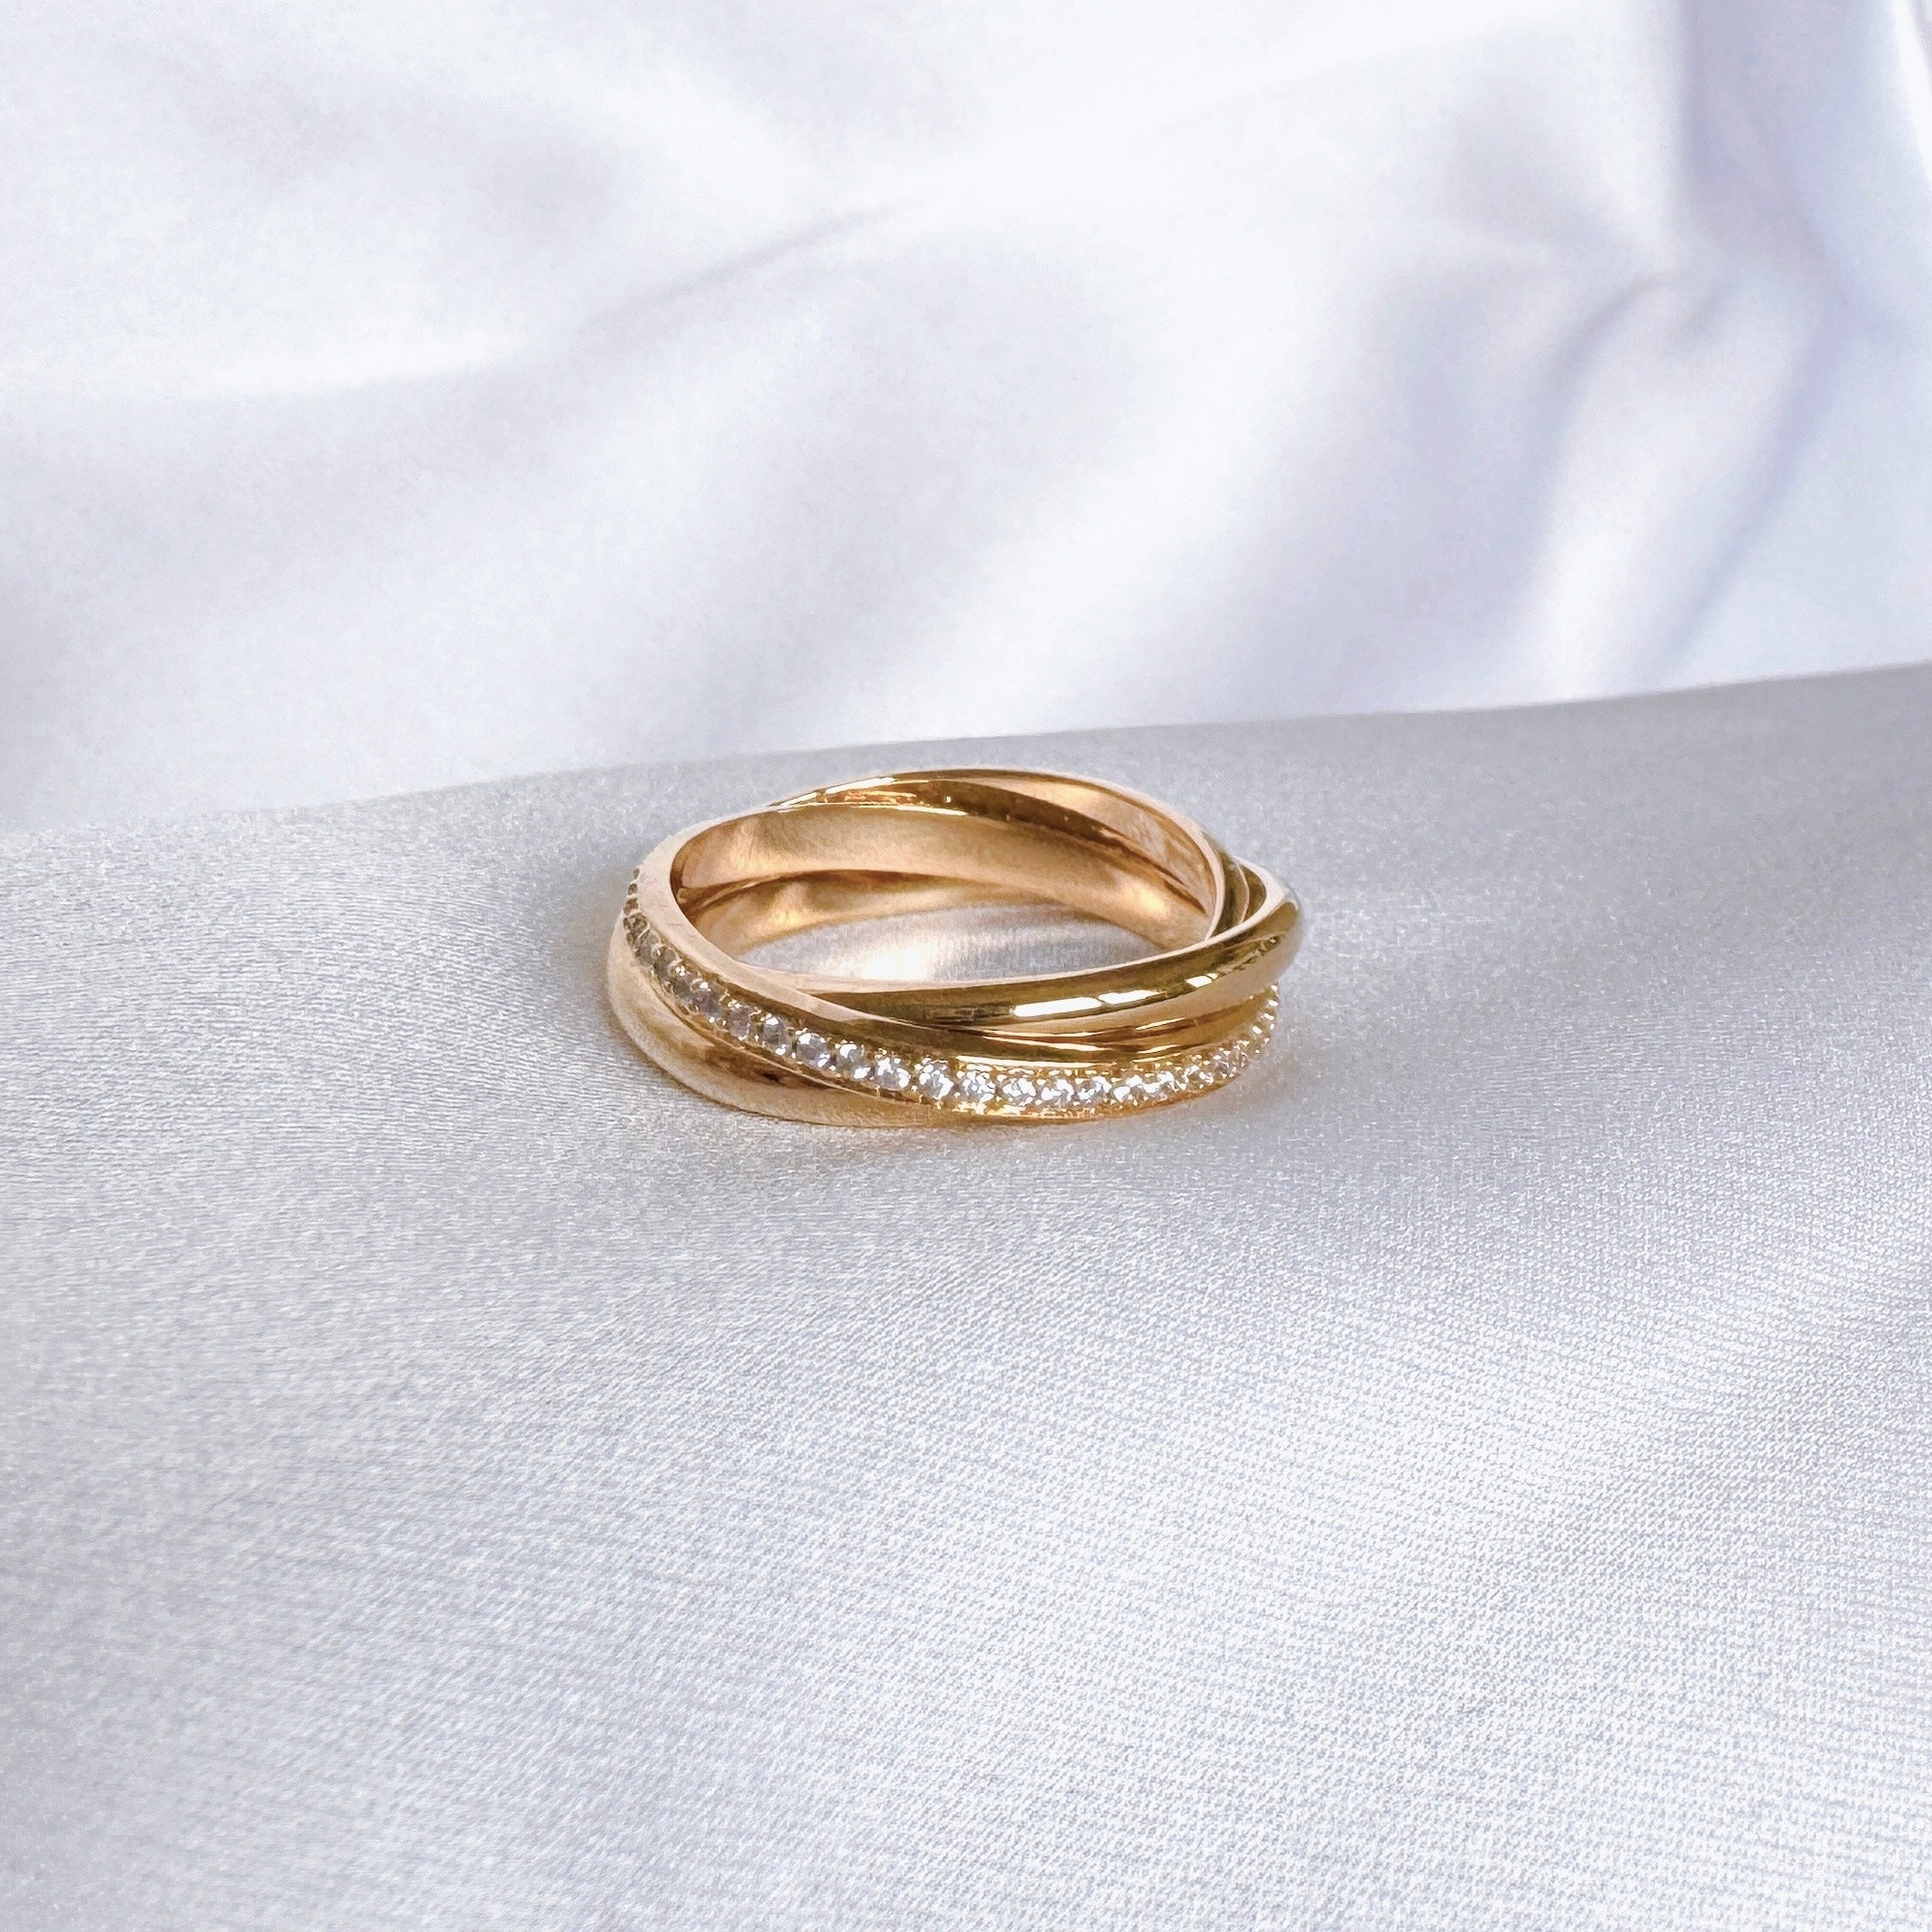 Gold-plated “3 rings” ring